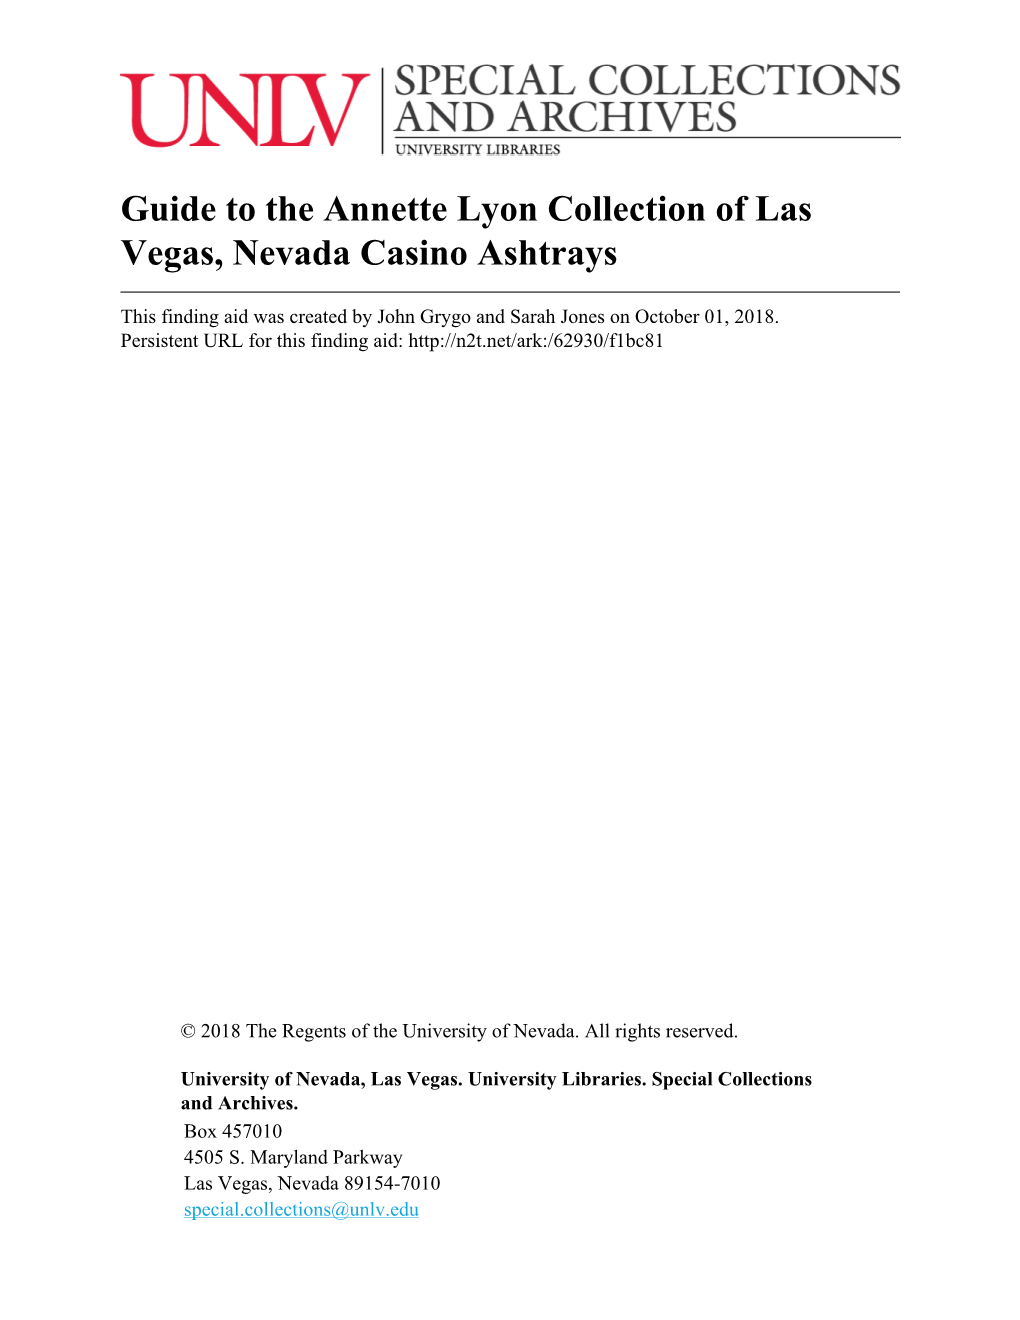 Guide to the Annette Lyon Collection of Las Vegas, Nevada Casino Ashtrays